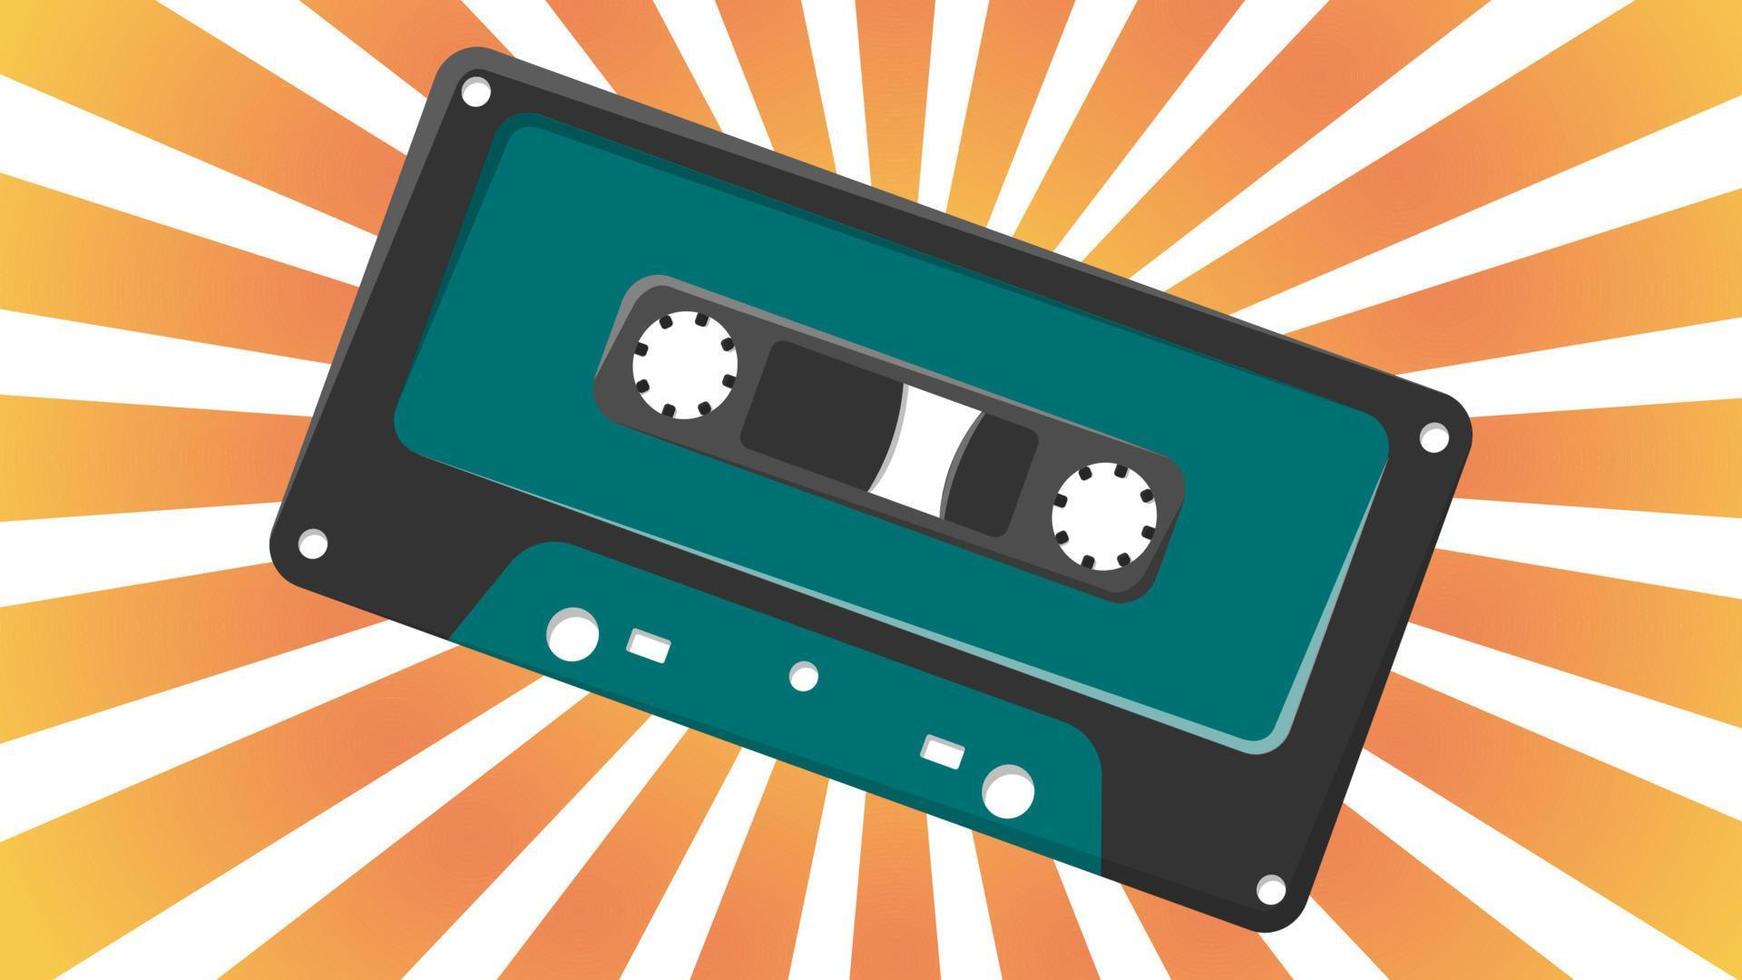 Old retro vintage green music audio cassette for audio tape recorder with magnetic tape from 70s, 80s, 90s against the background of the orange rays of the sun. Vector illustration